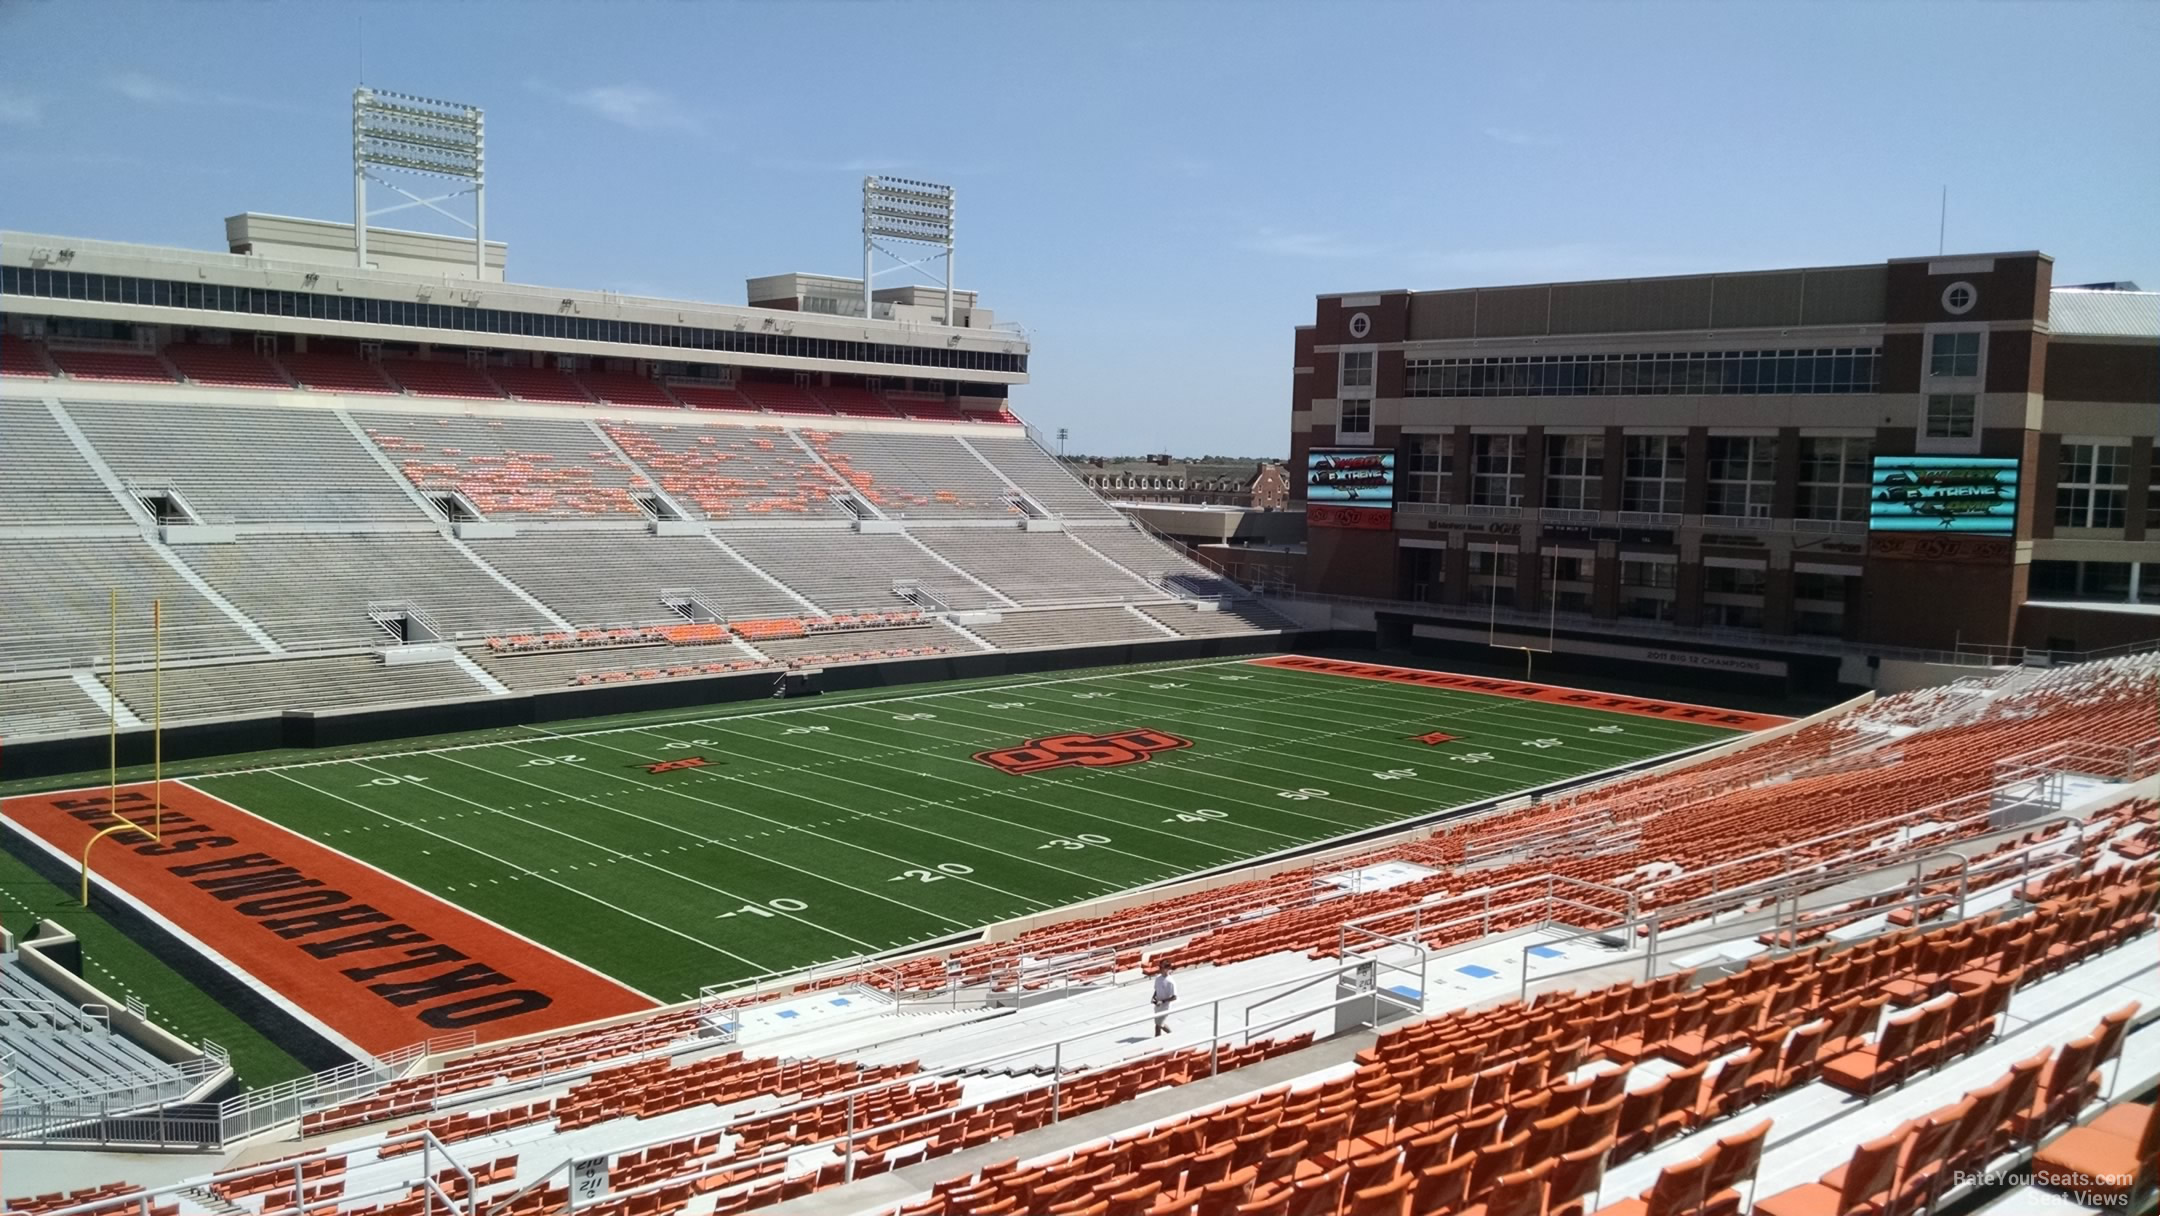 section 311, row 19 seat view  - boone pickens stadium